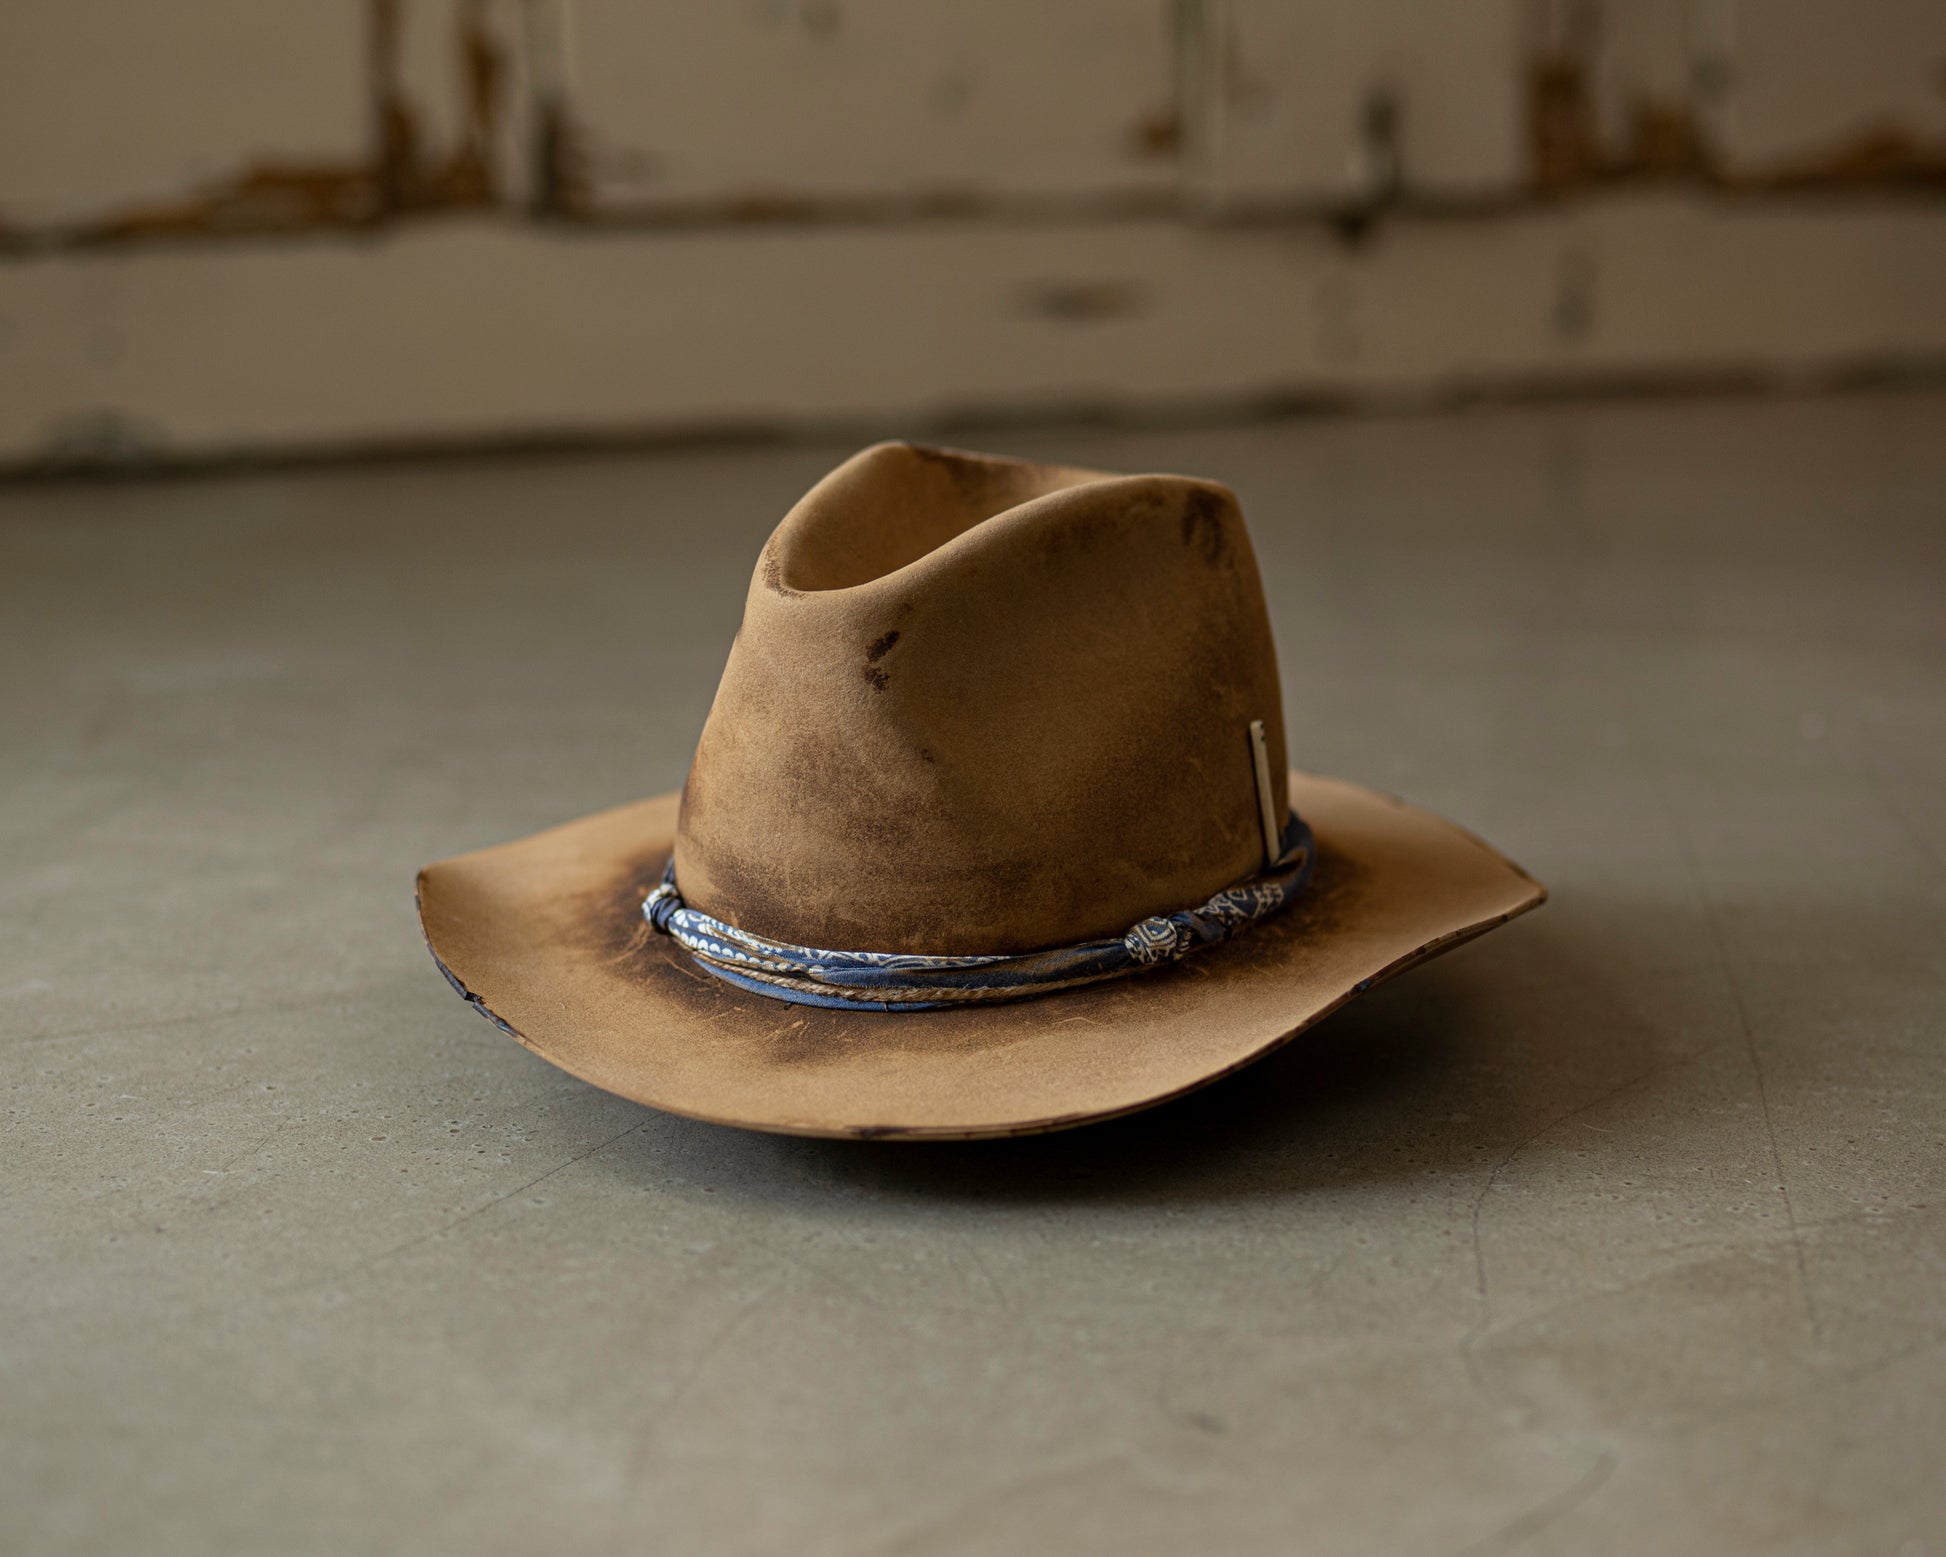 Hats Off To A New, Local, Hand Crafted Hat Maker, Ryan McGrath